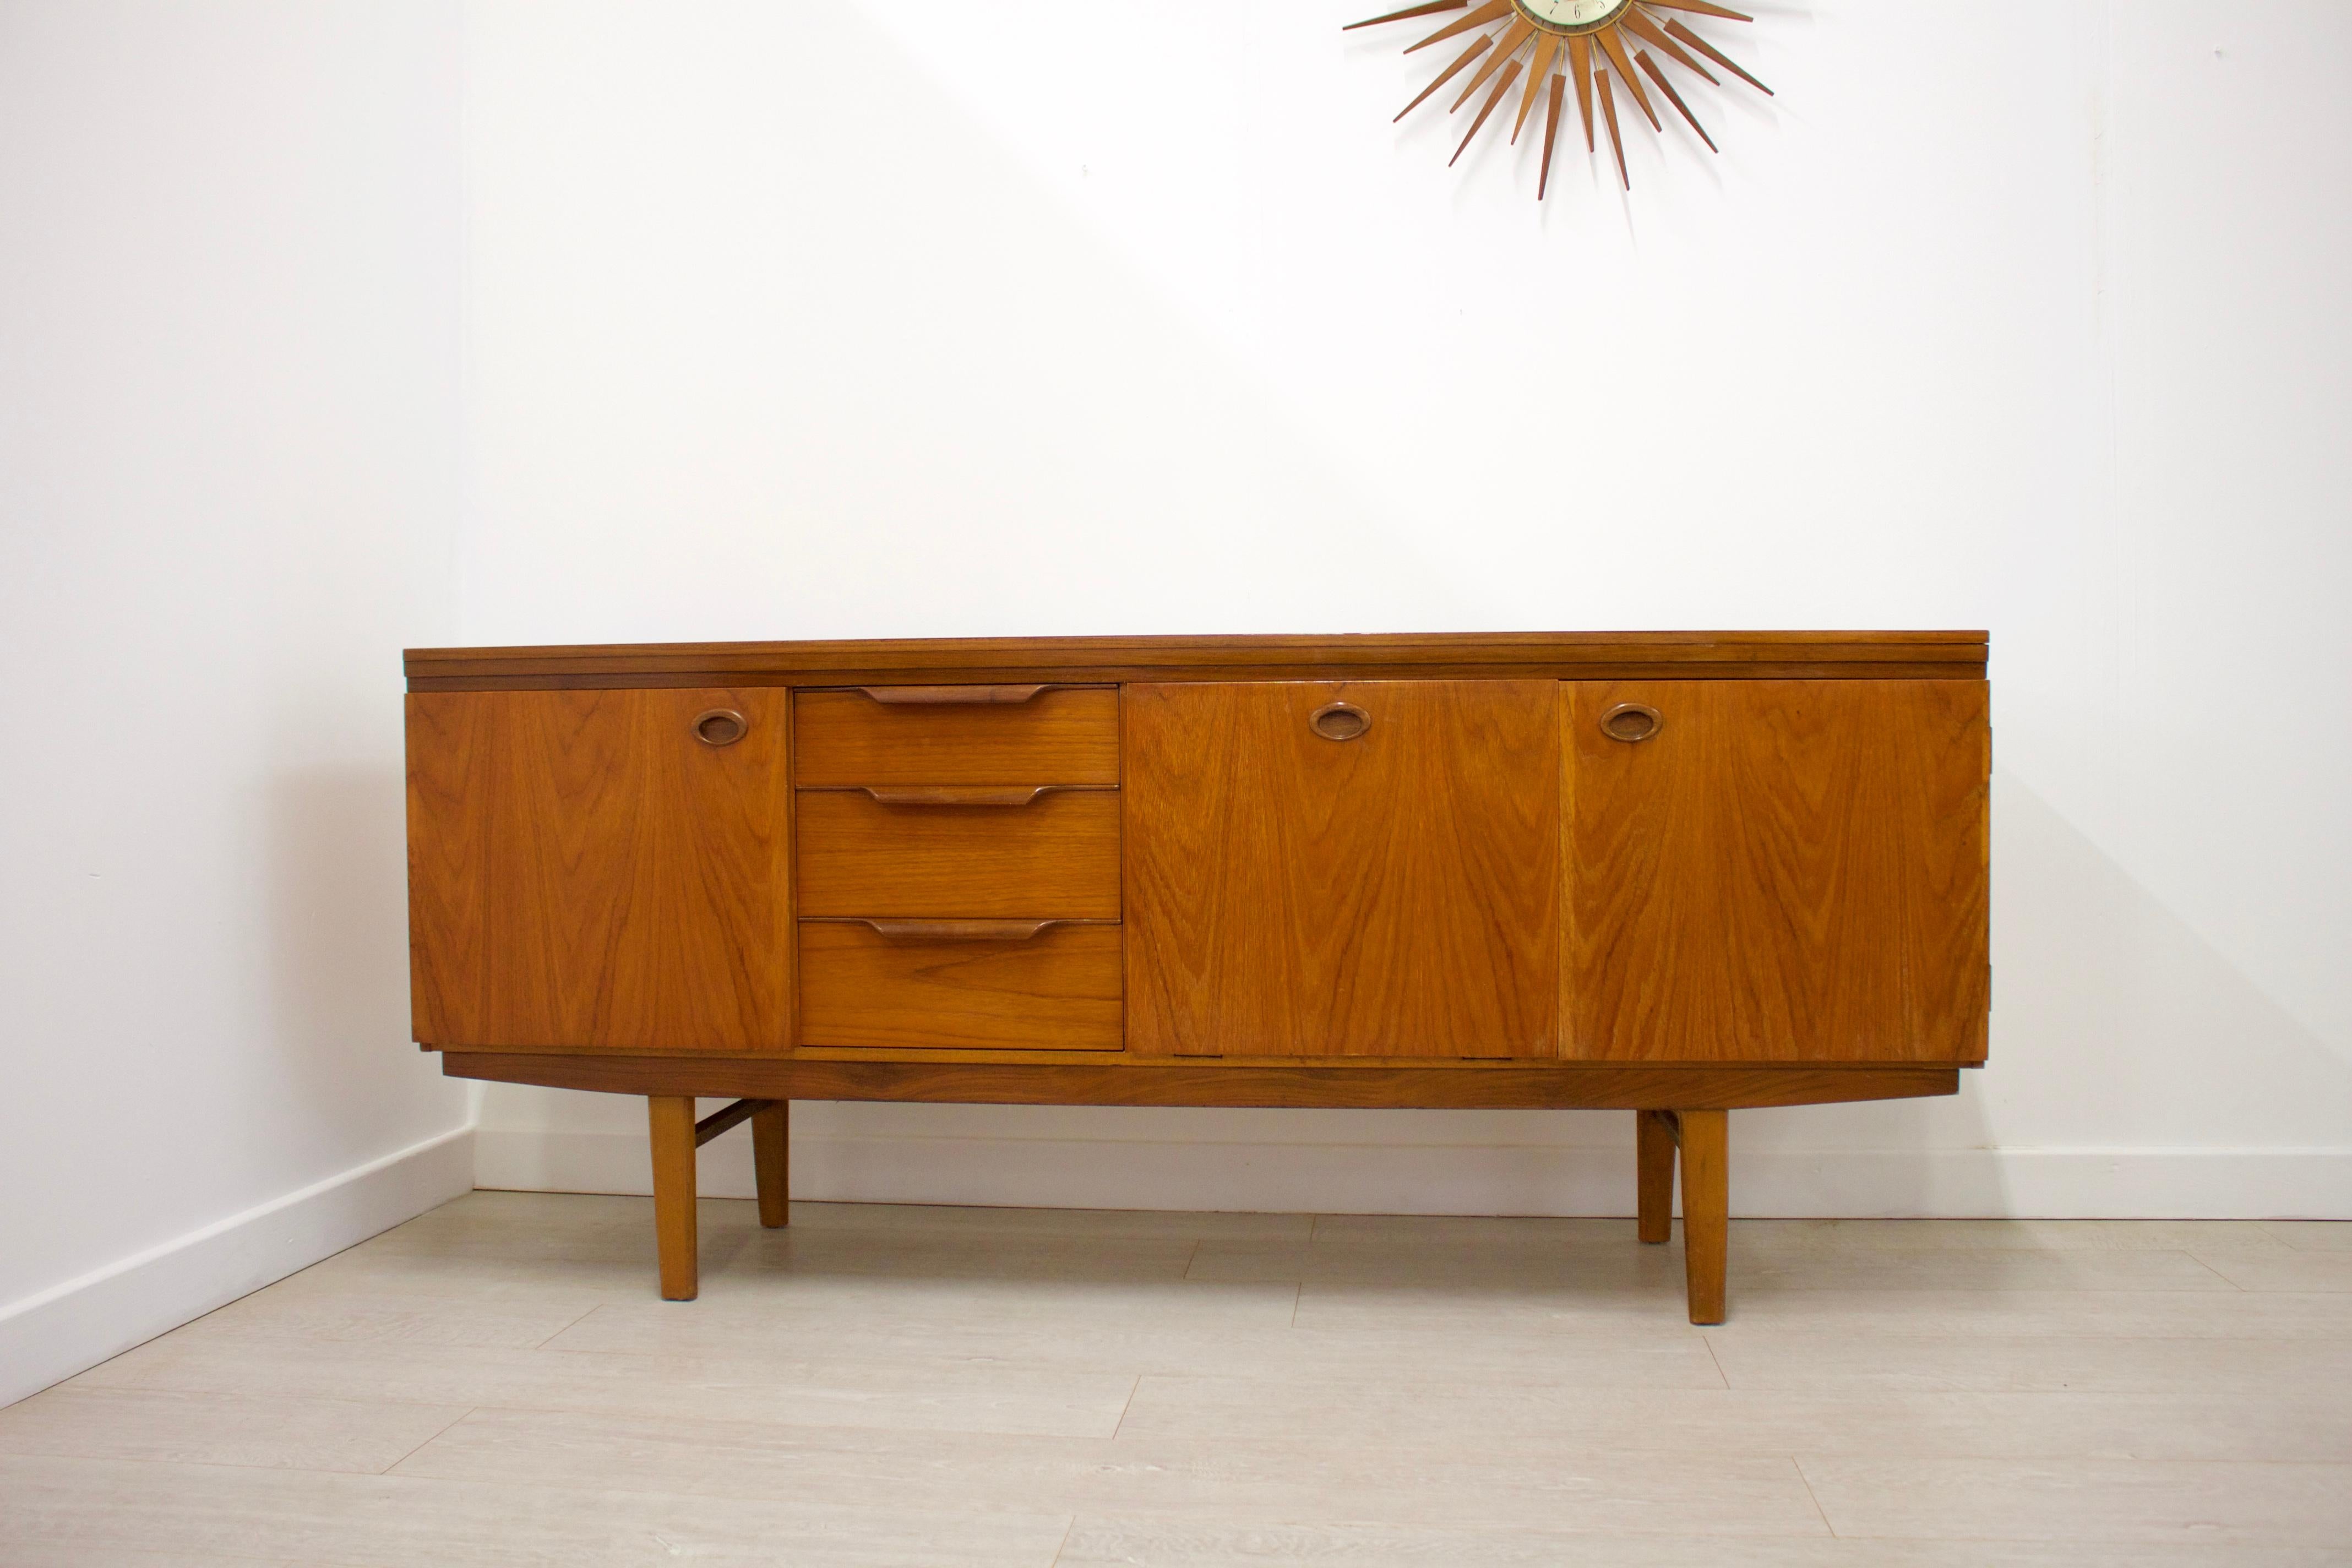 -Mid-Century Modern sideboard
- Made of teak & teak veneer
- Features 2 cupboards with shelves, a pull-down drinks cabinet and 3 drawers.